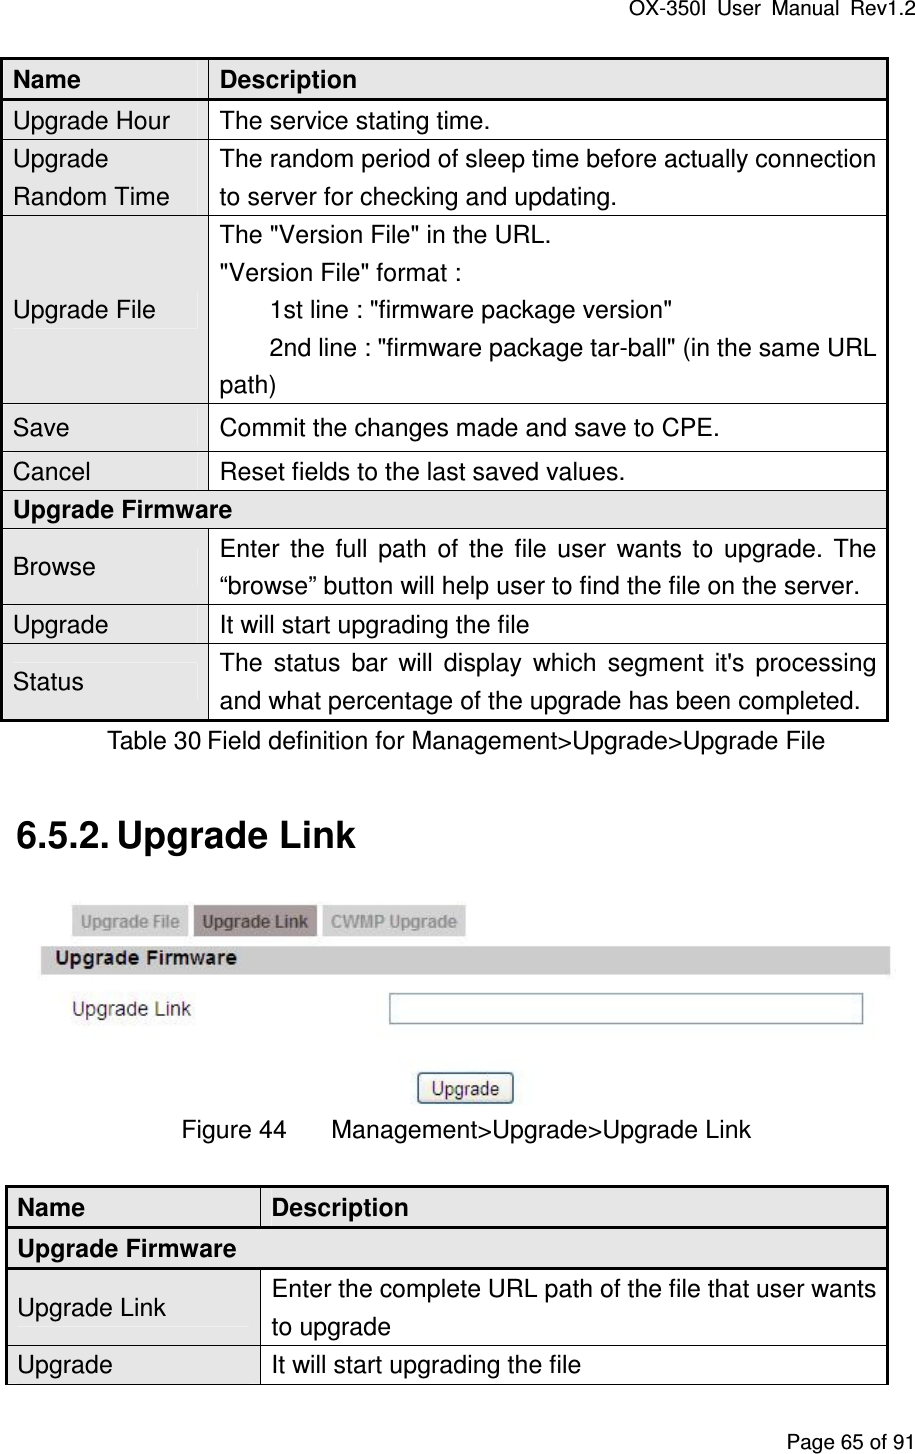 OX-350I  User  Manual  Rev1.2 Page 65 of 91 Name  Description Upgrade Hour  The service stating time. Upgrade Random Time The random period of sleep time before actually connection to server for checking and updating. Upgrade File The &quot;Version File&quot; in the URL. &quot;Version File&quot; format :   1st line : &quot;firmware package version&quot;   2nd line : &quot;firmware package tar-ball&quot; (in the same URL path) Save  Commit the changes made and save to CPE. Cancel  Reset fields to the last saved values. Upgrade Firmware Browse  Enter  the  full  path  of  the  file  user  wants  to  upgrade.  The “browse” button will help user to find the file on the server. Upgrade  It will start upgrading the file Status  The  status  bar  will  display  which  segment  it&apos;s  processing and what percentage of the upgrade has been completed. Table 30 Field definition for Management&gt;Upgrade&gt;Upgrade File 6.5.2. Upgrade Link    Figure 44  Management&gt;Upgrade&gt;Upgrade Link Name  Description Upgrade Firmware Upgrade Link  Enter the complete URL path of the file that user wants to upgrade Upgrade  It will start upgrading the file 